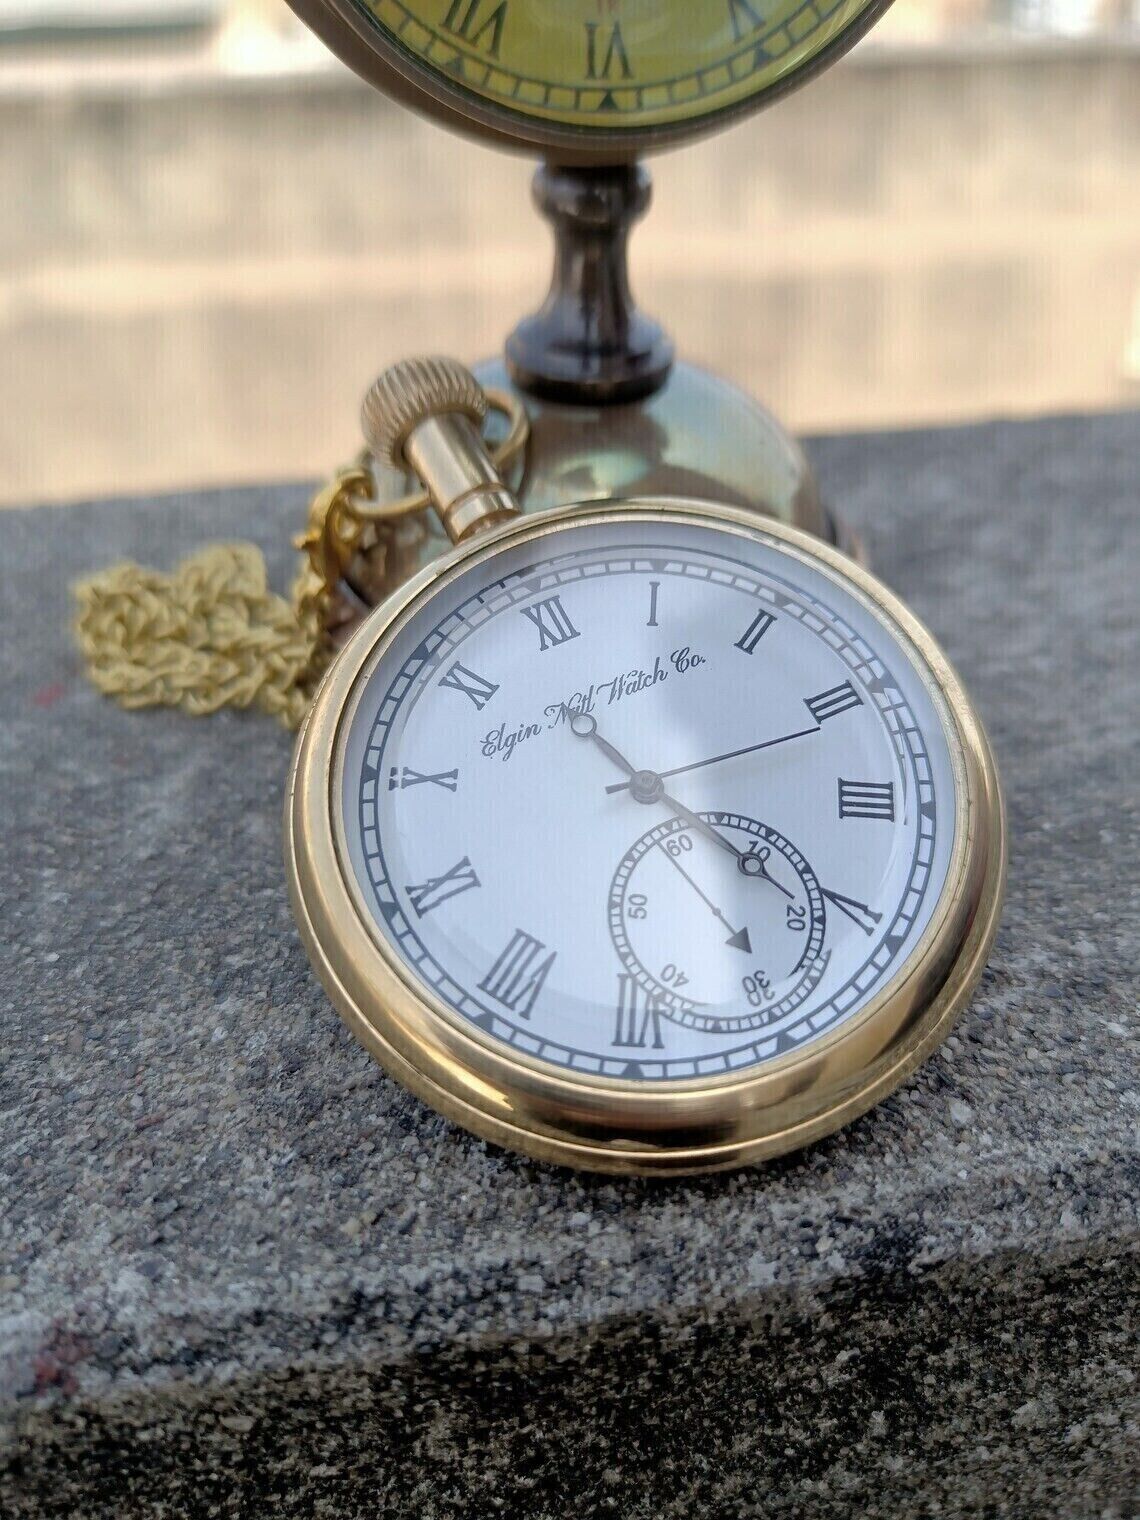 Vintage Antique Engraved Brass Elgin Pocket watch W/ Chain Gift for occasion Her